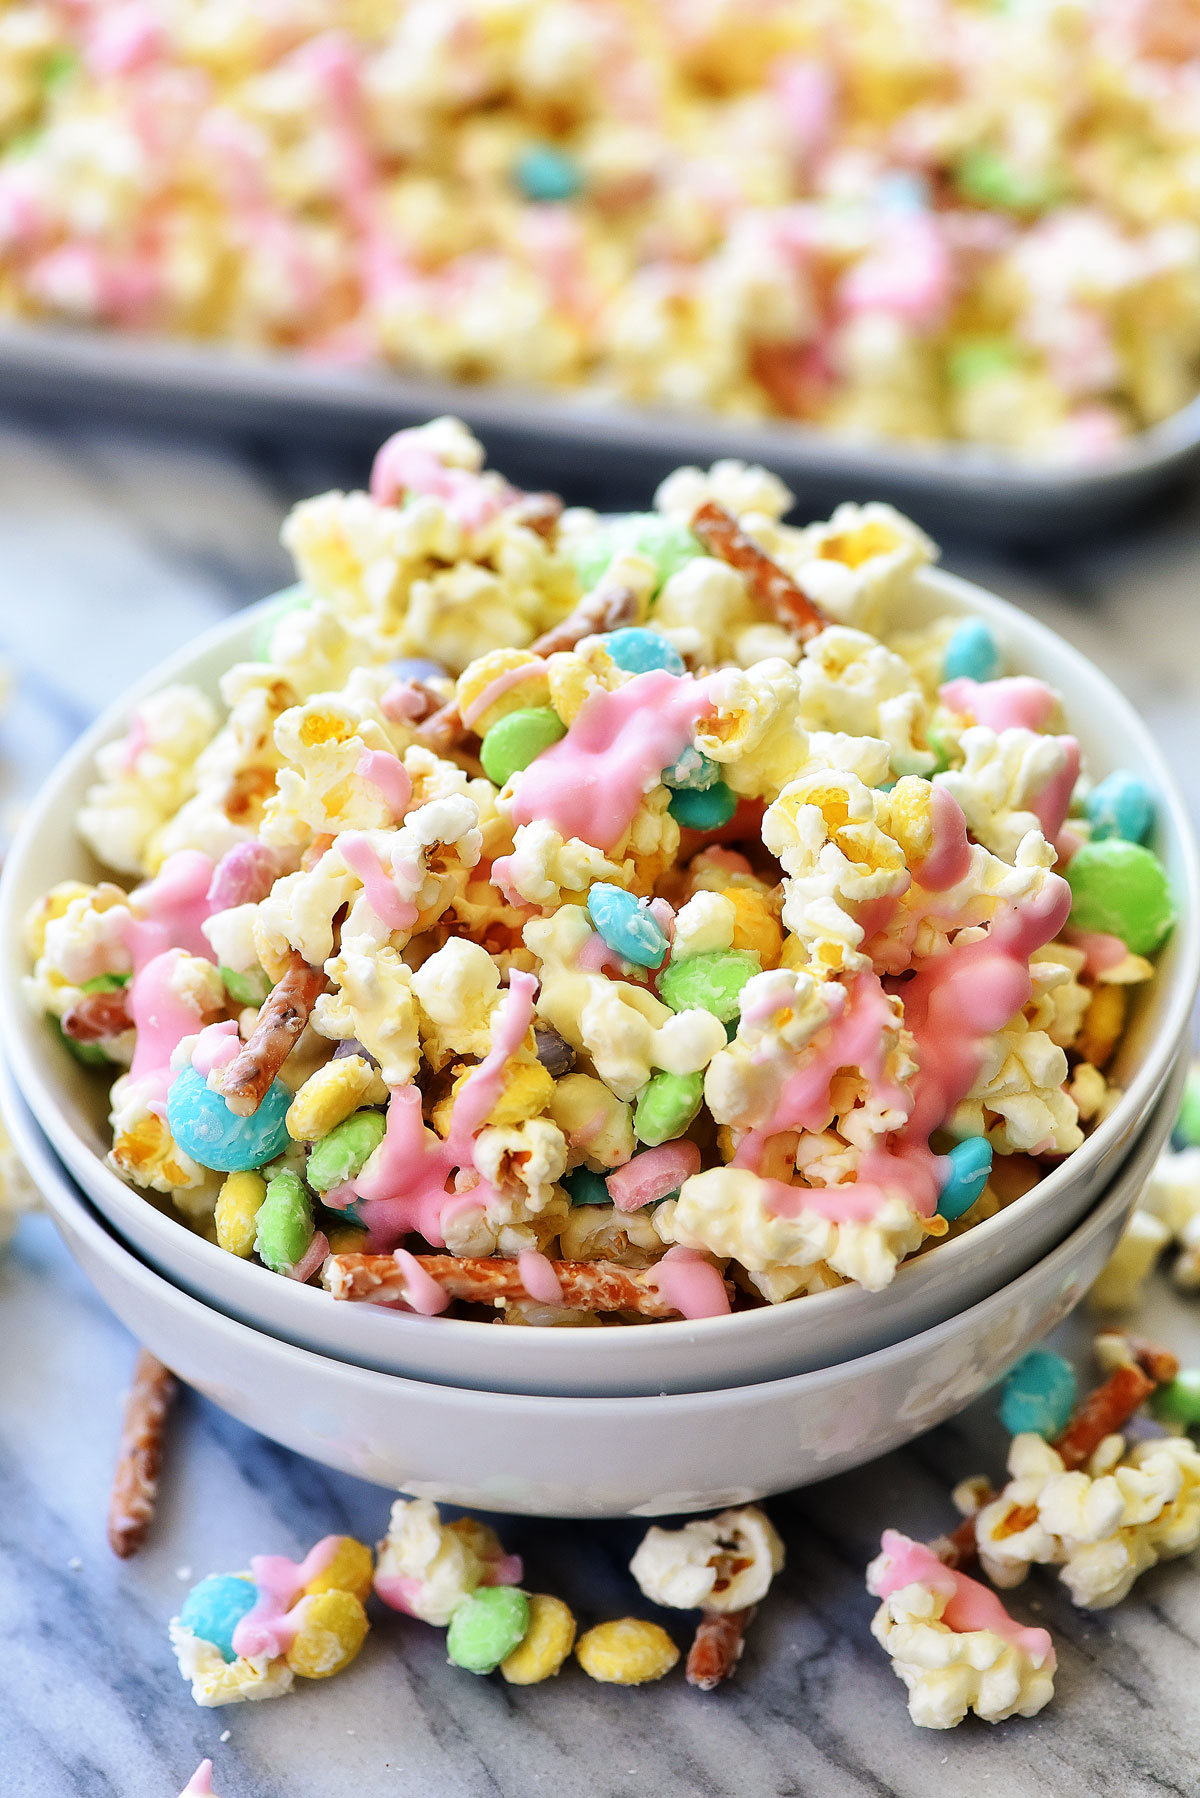 Bunny Bait is a delicious treat filled with popcorn, M&M candies and pretzels all coated in white chocolate. Life-in-the-Lofthouse.com